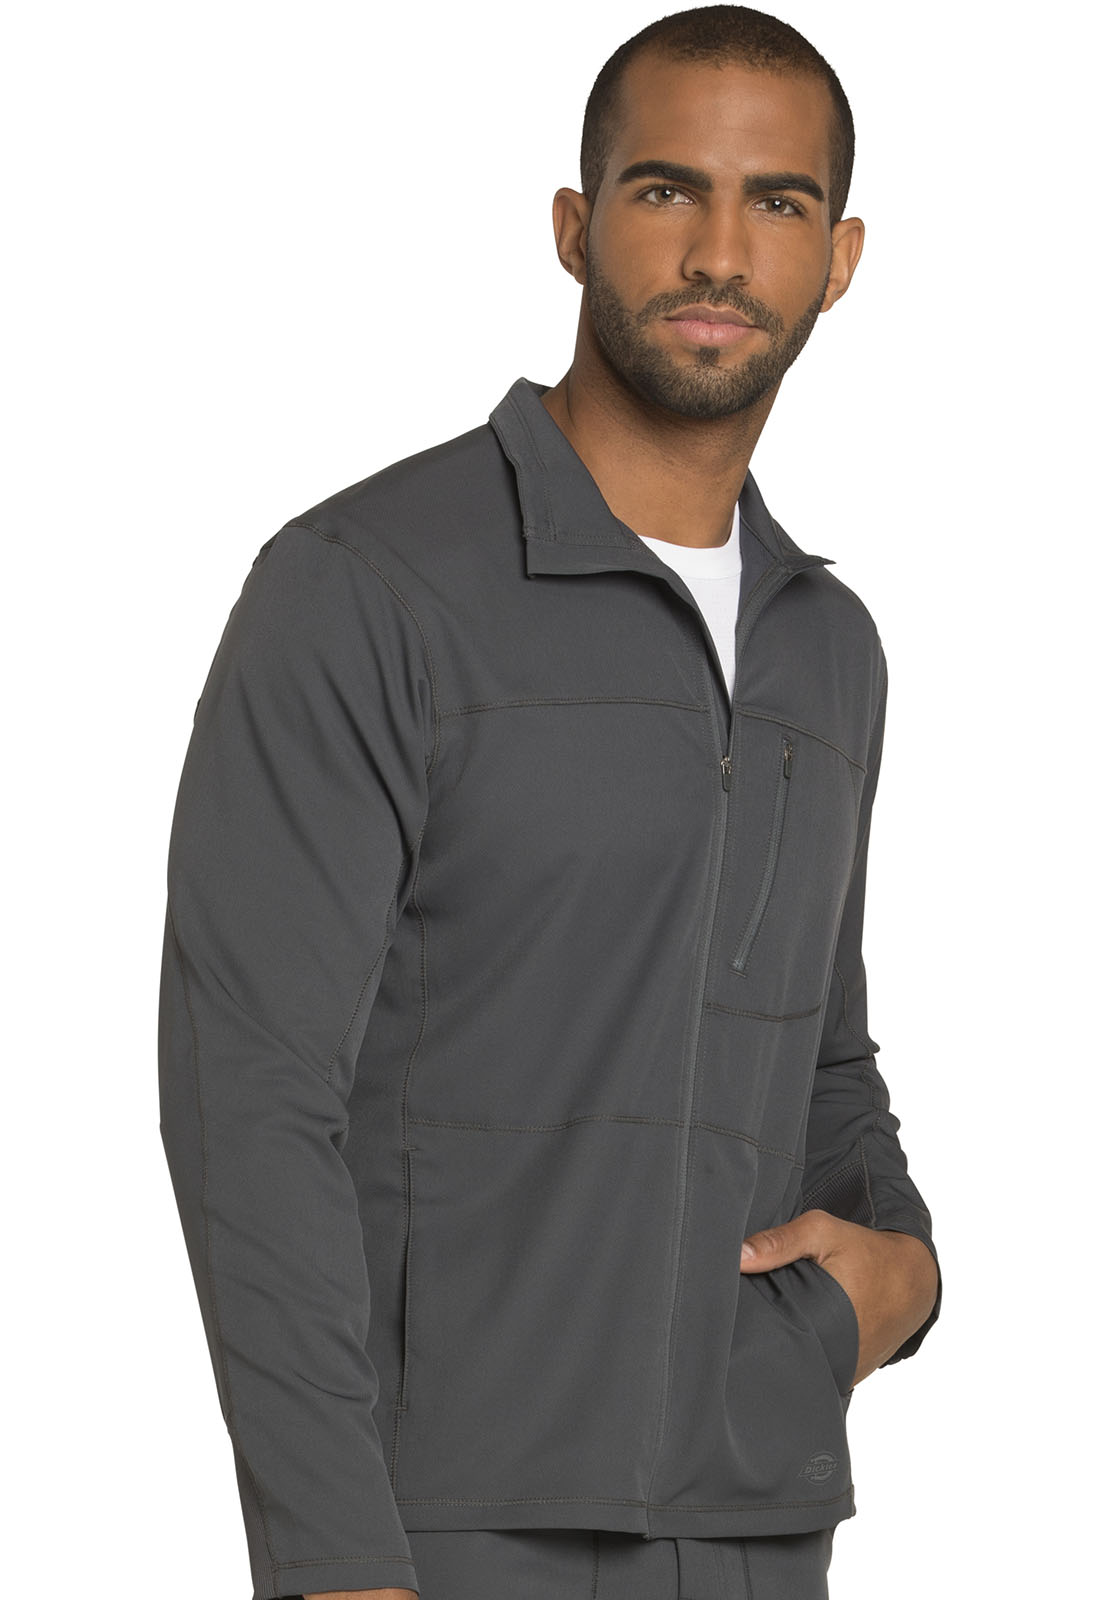 Dickies Dickies Dynamix Men's Zip Front Warm-up Jacket in Pewter from ...